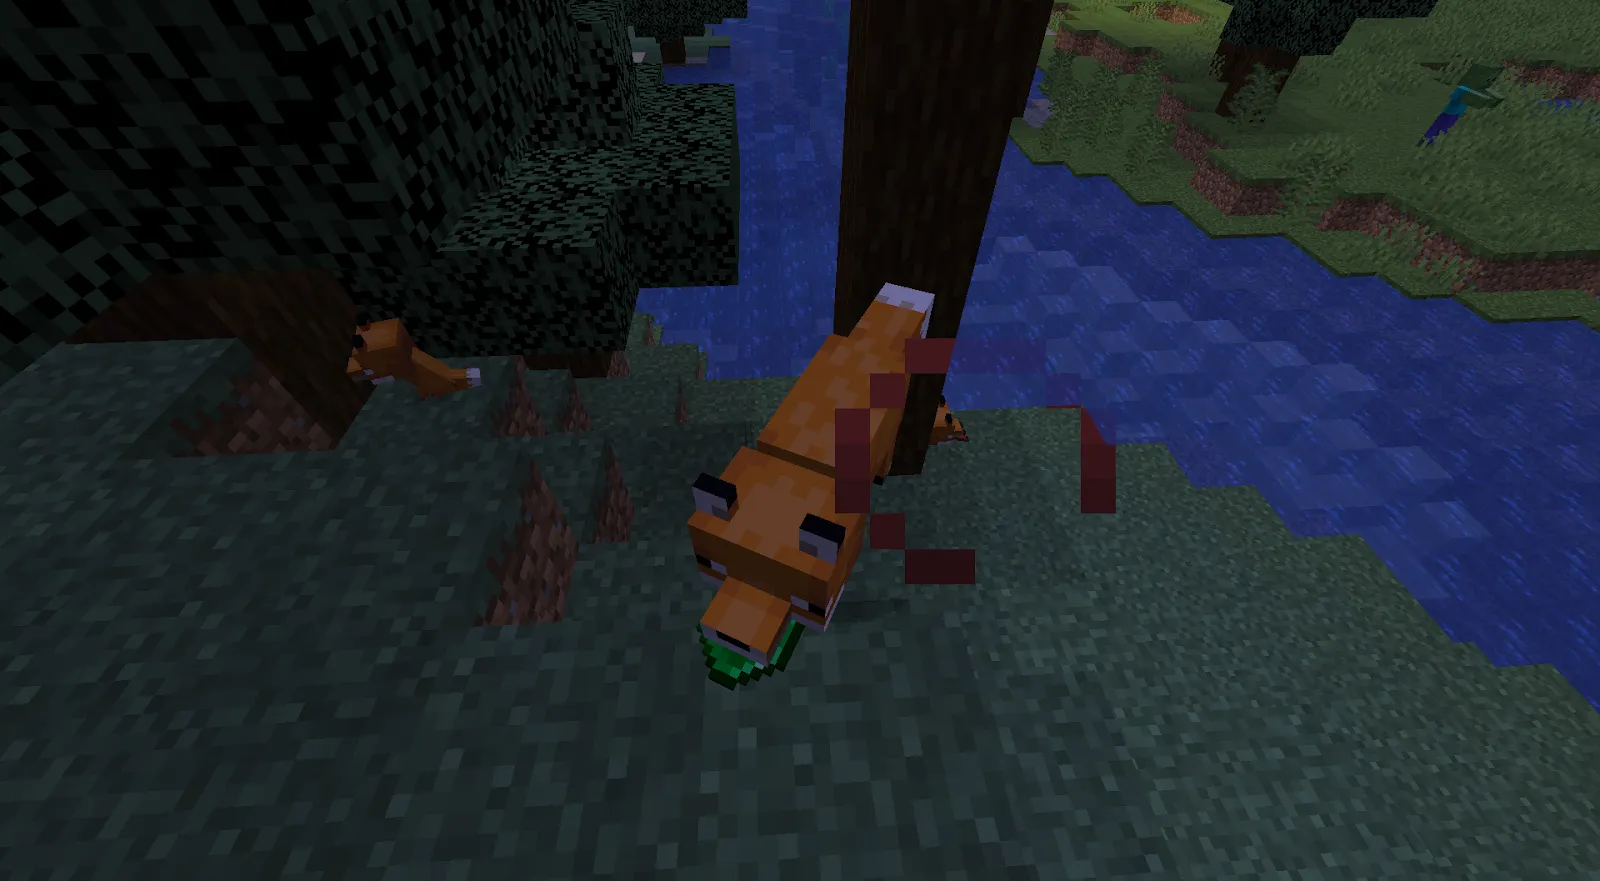 An Image of a fox holding an emerald in Minecraft